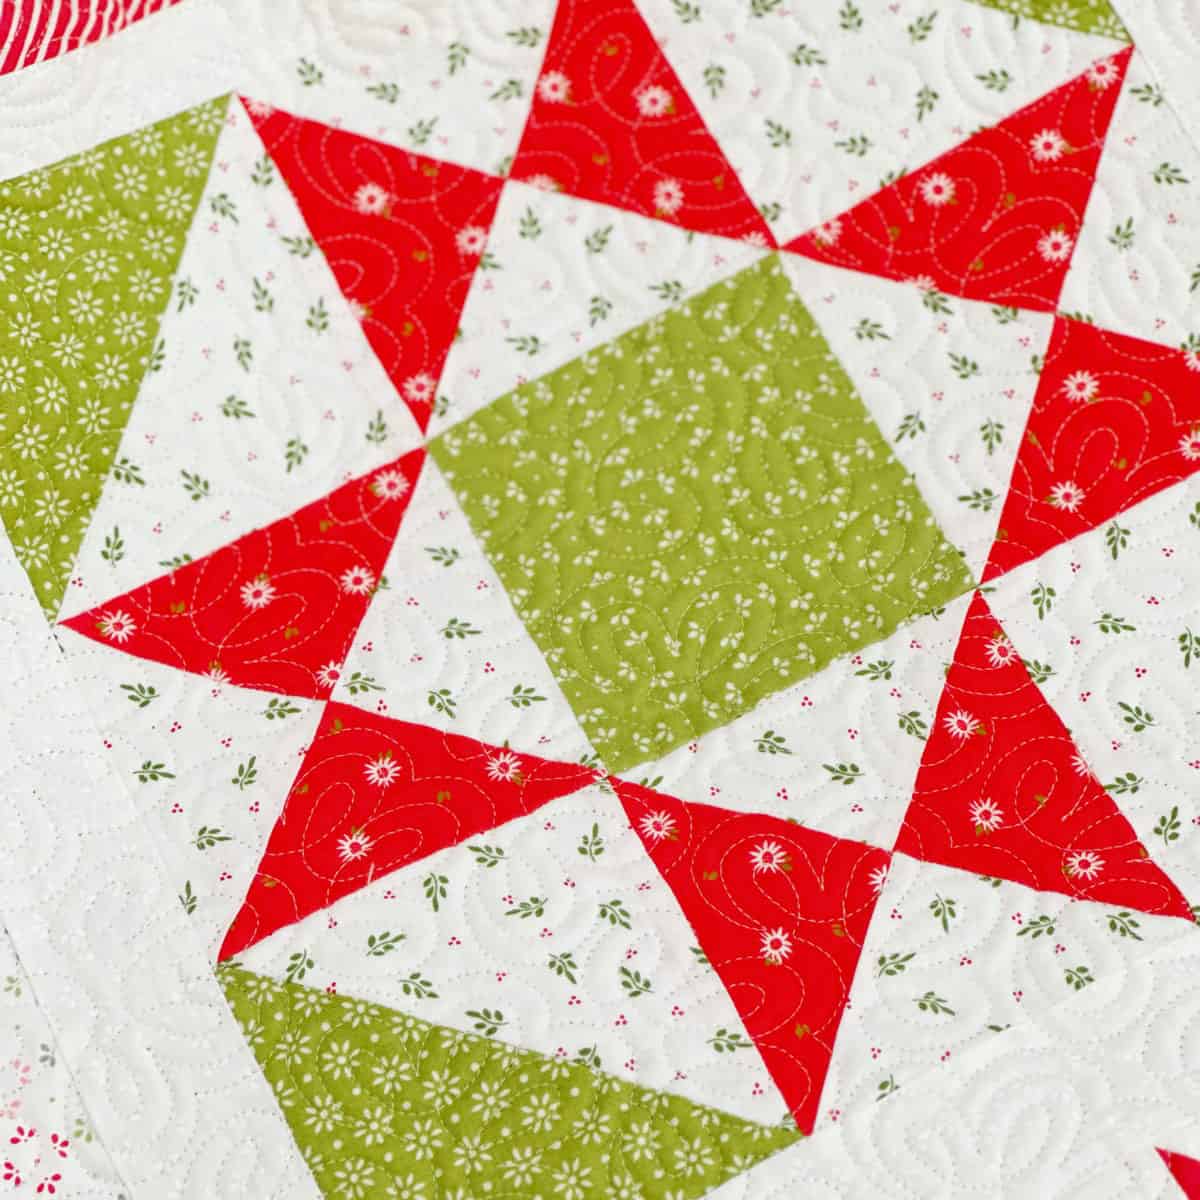 Patchwork  star quilt block in red, green, and leaves and berries fabrics